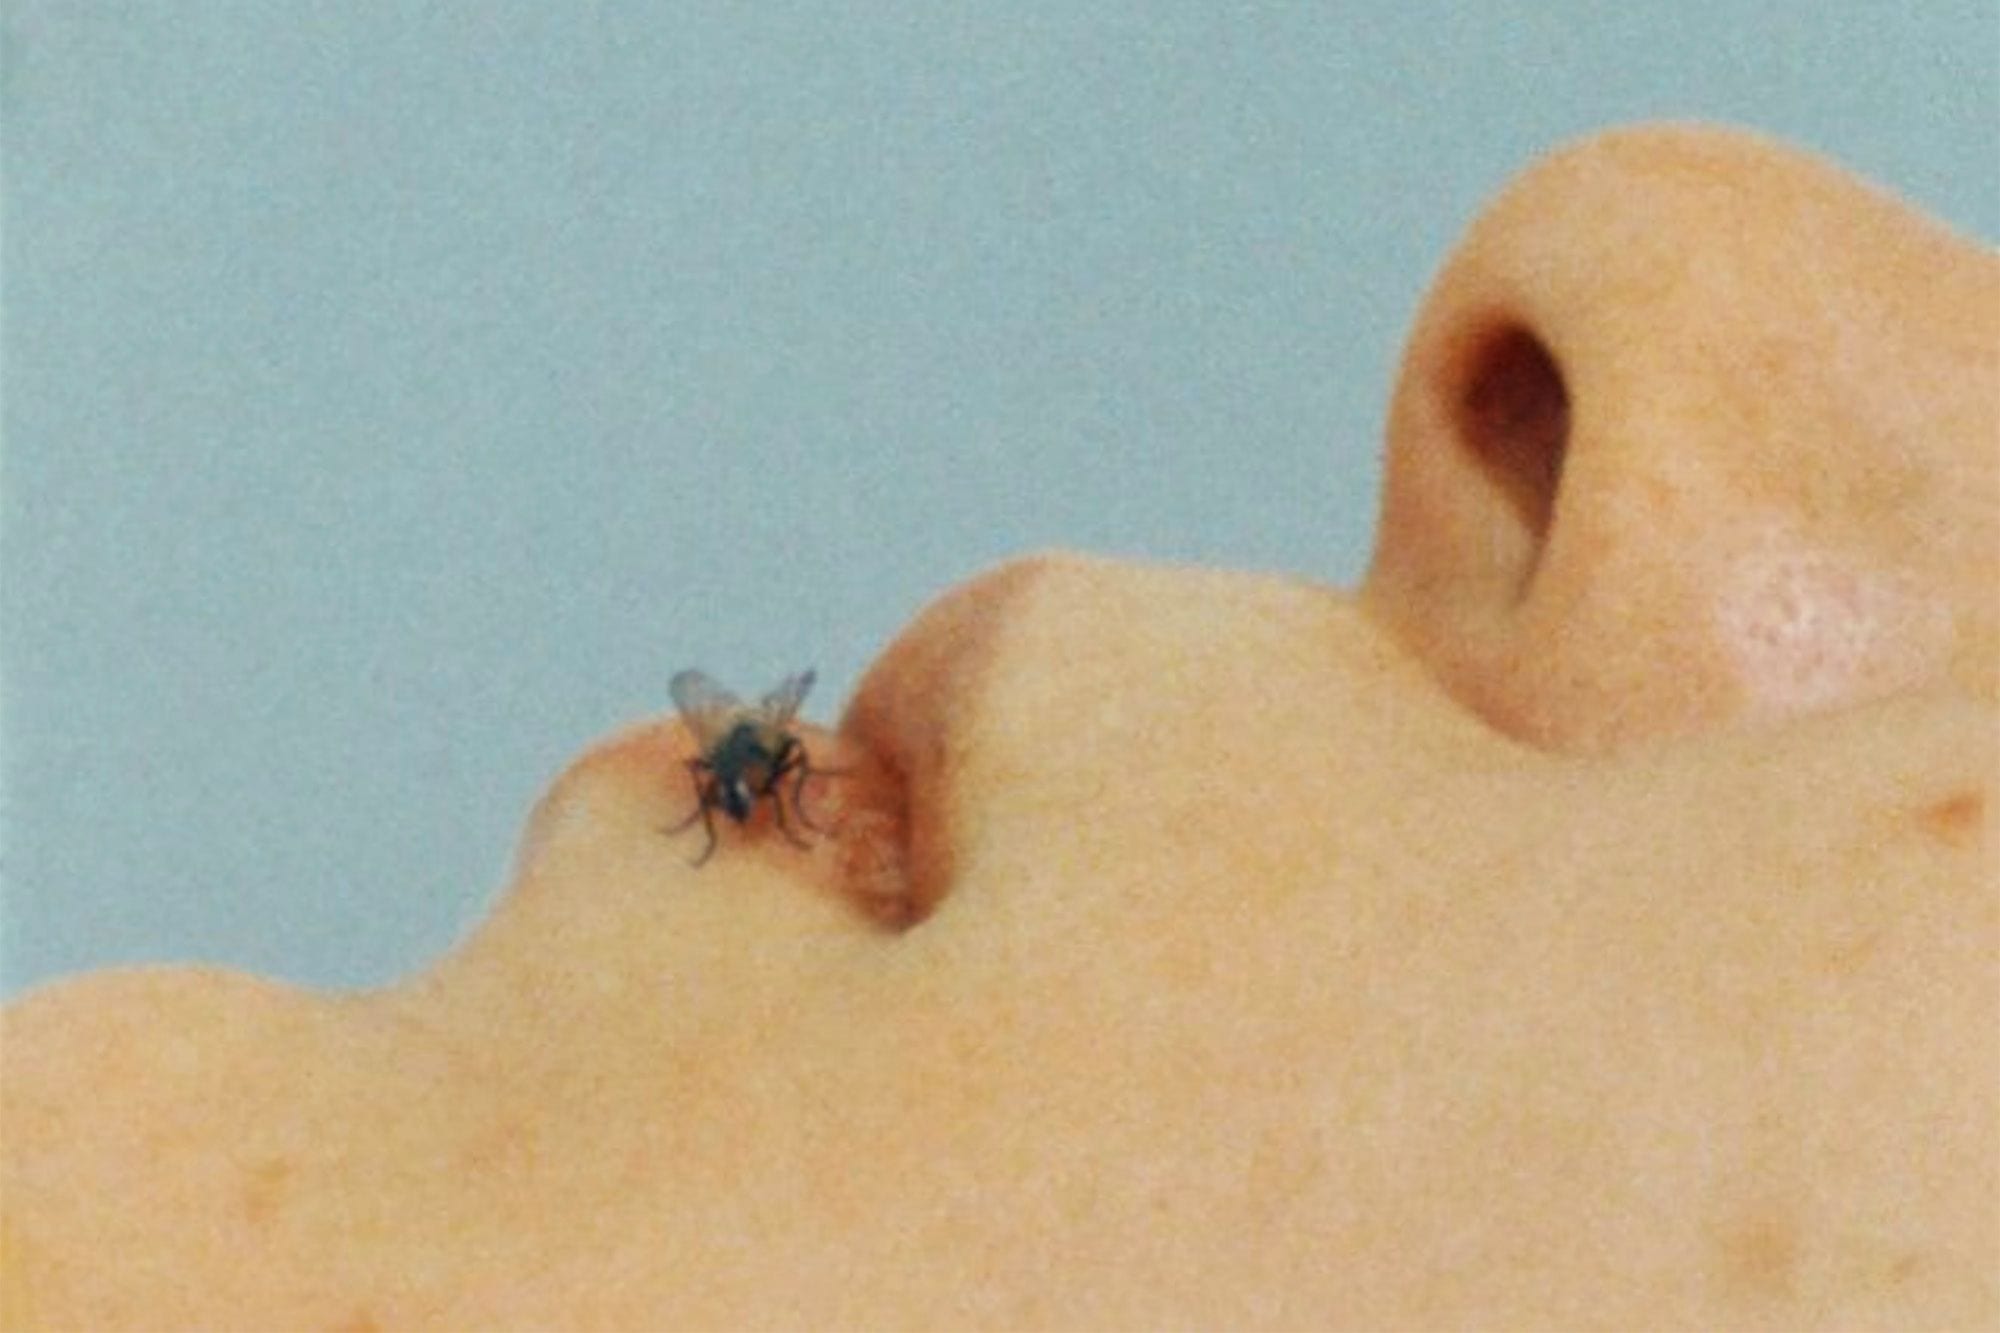 Defragmenting Bodies: Yoko Ono’s ‘Fly’ at 50